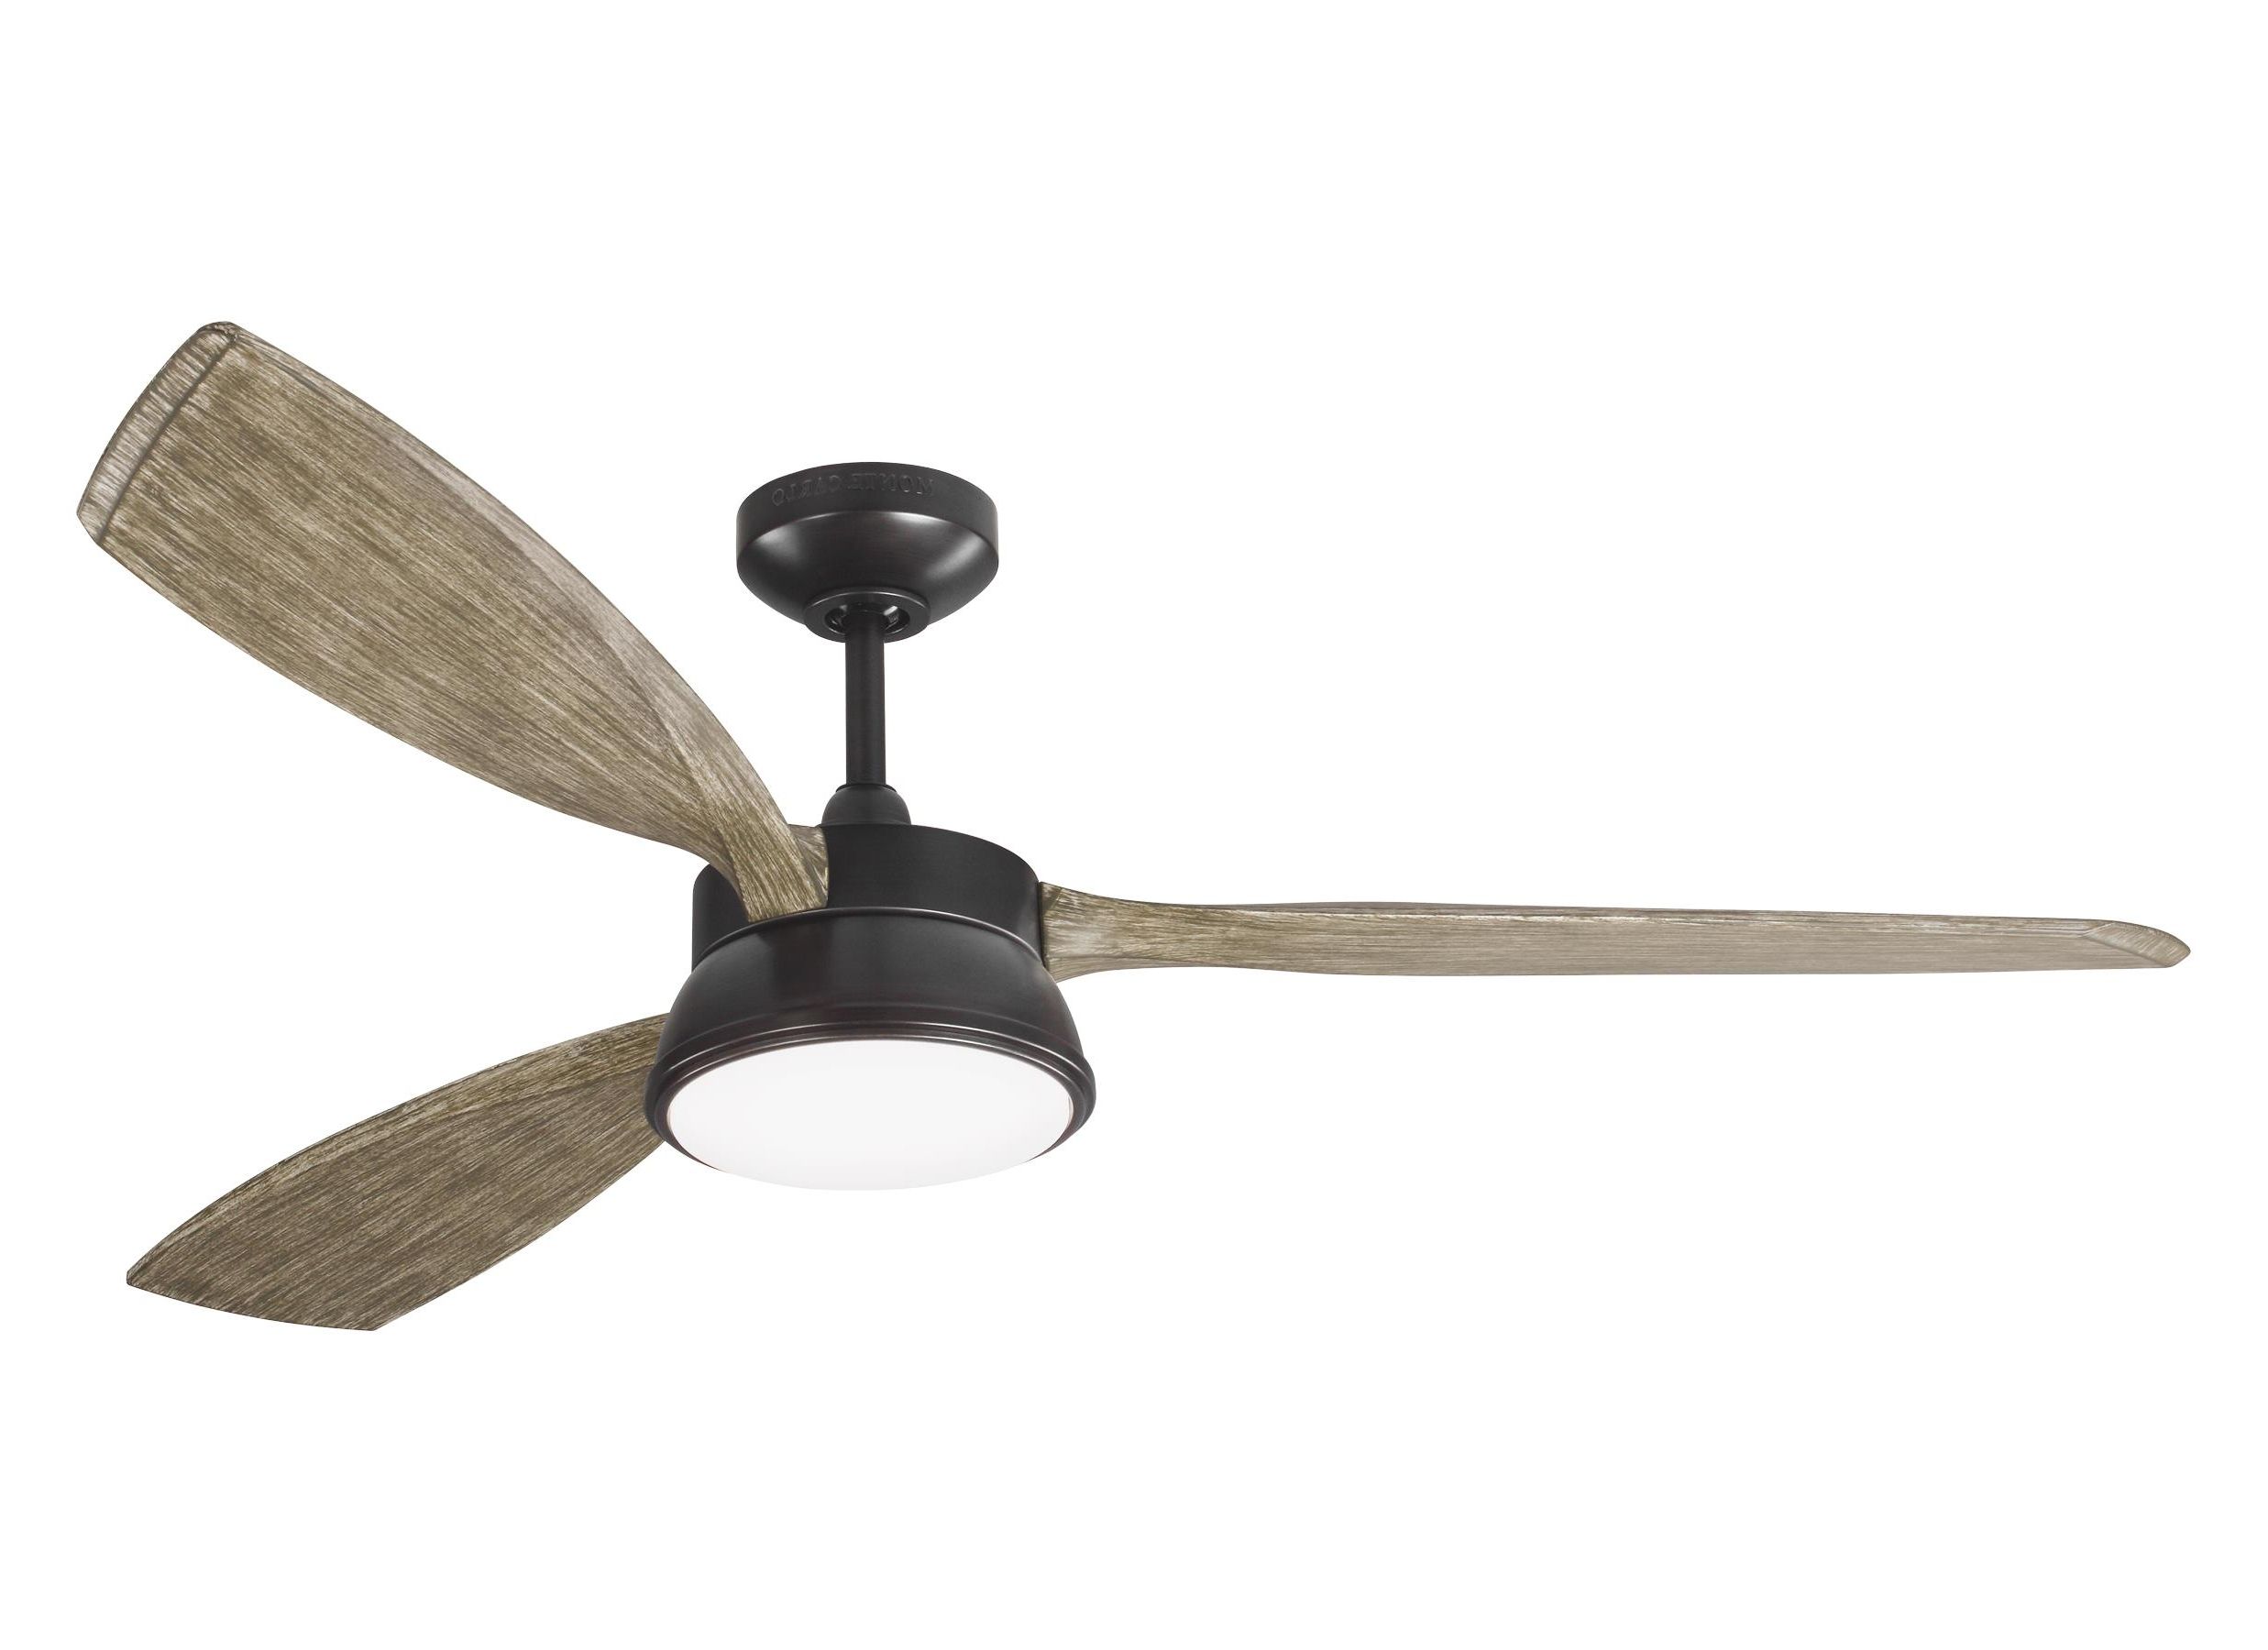 Rustic Outdoor Ceiling Fans Intended For Widely Used 57" Mid Century Modern Outdoor/indoor Downlight Rustic Ceiling Fan (View 9 of 20)